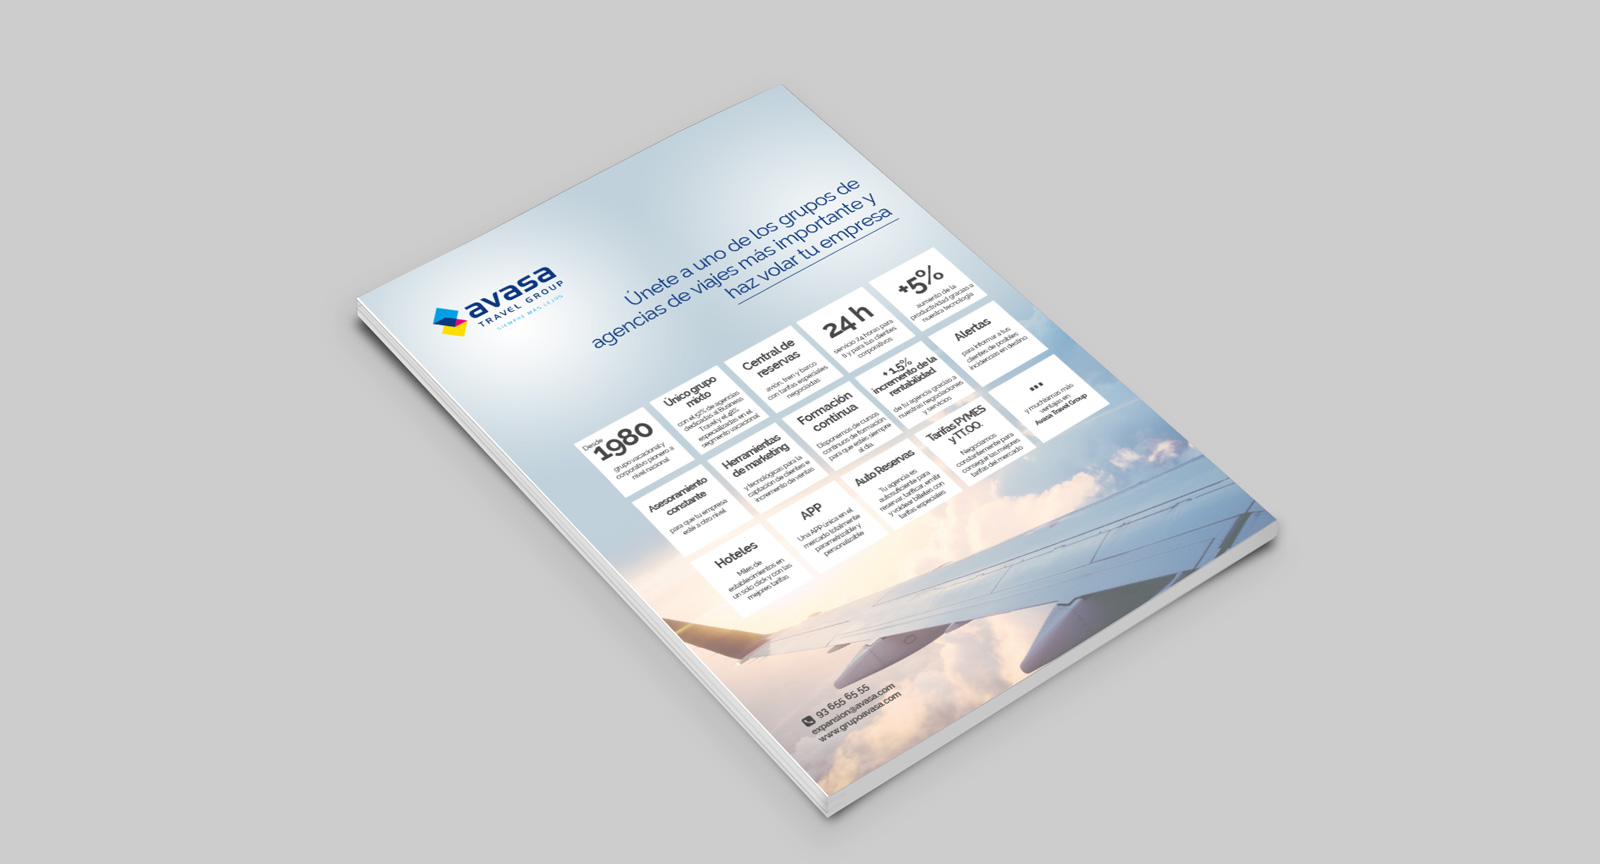 Graphic and creative design of flyers, brochures, diptychs and triptychs for advertising campaign for travel agency